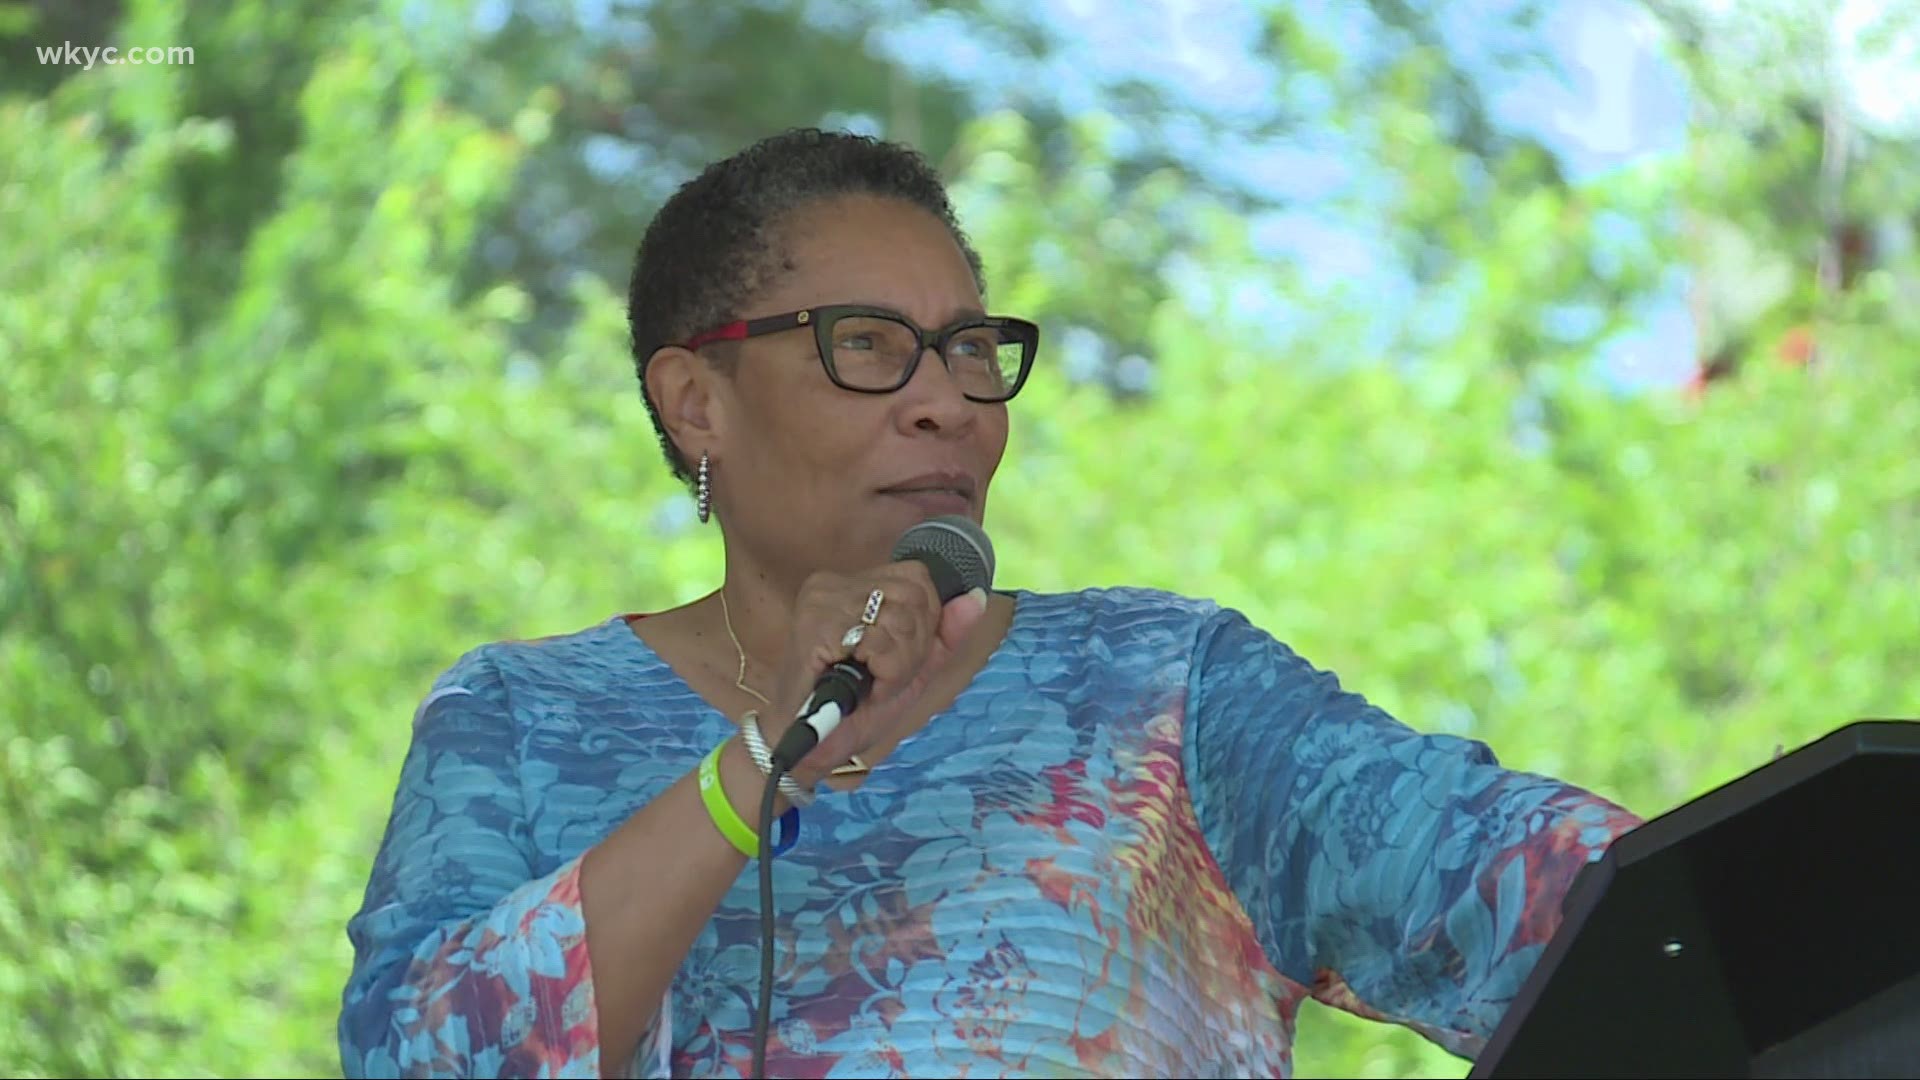 U.S. Secretary of Housing and Urban Development, and former 11th Congressional District representative, Marcia Fudge, led the 'America’s Back Together.'